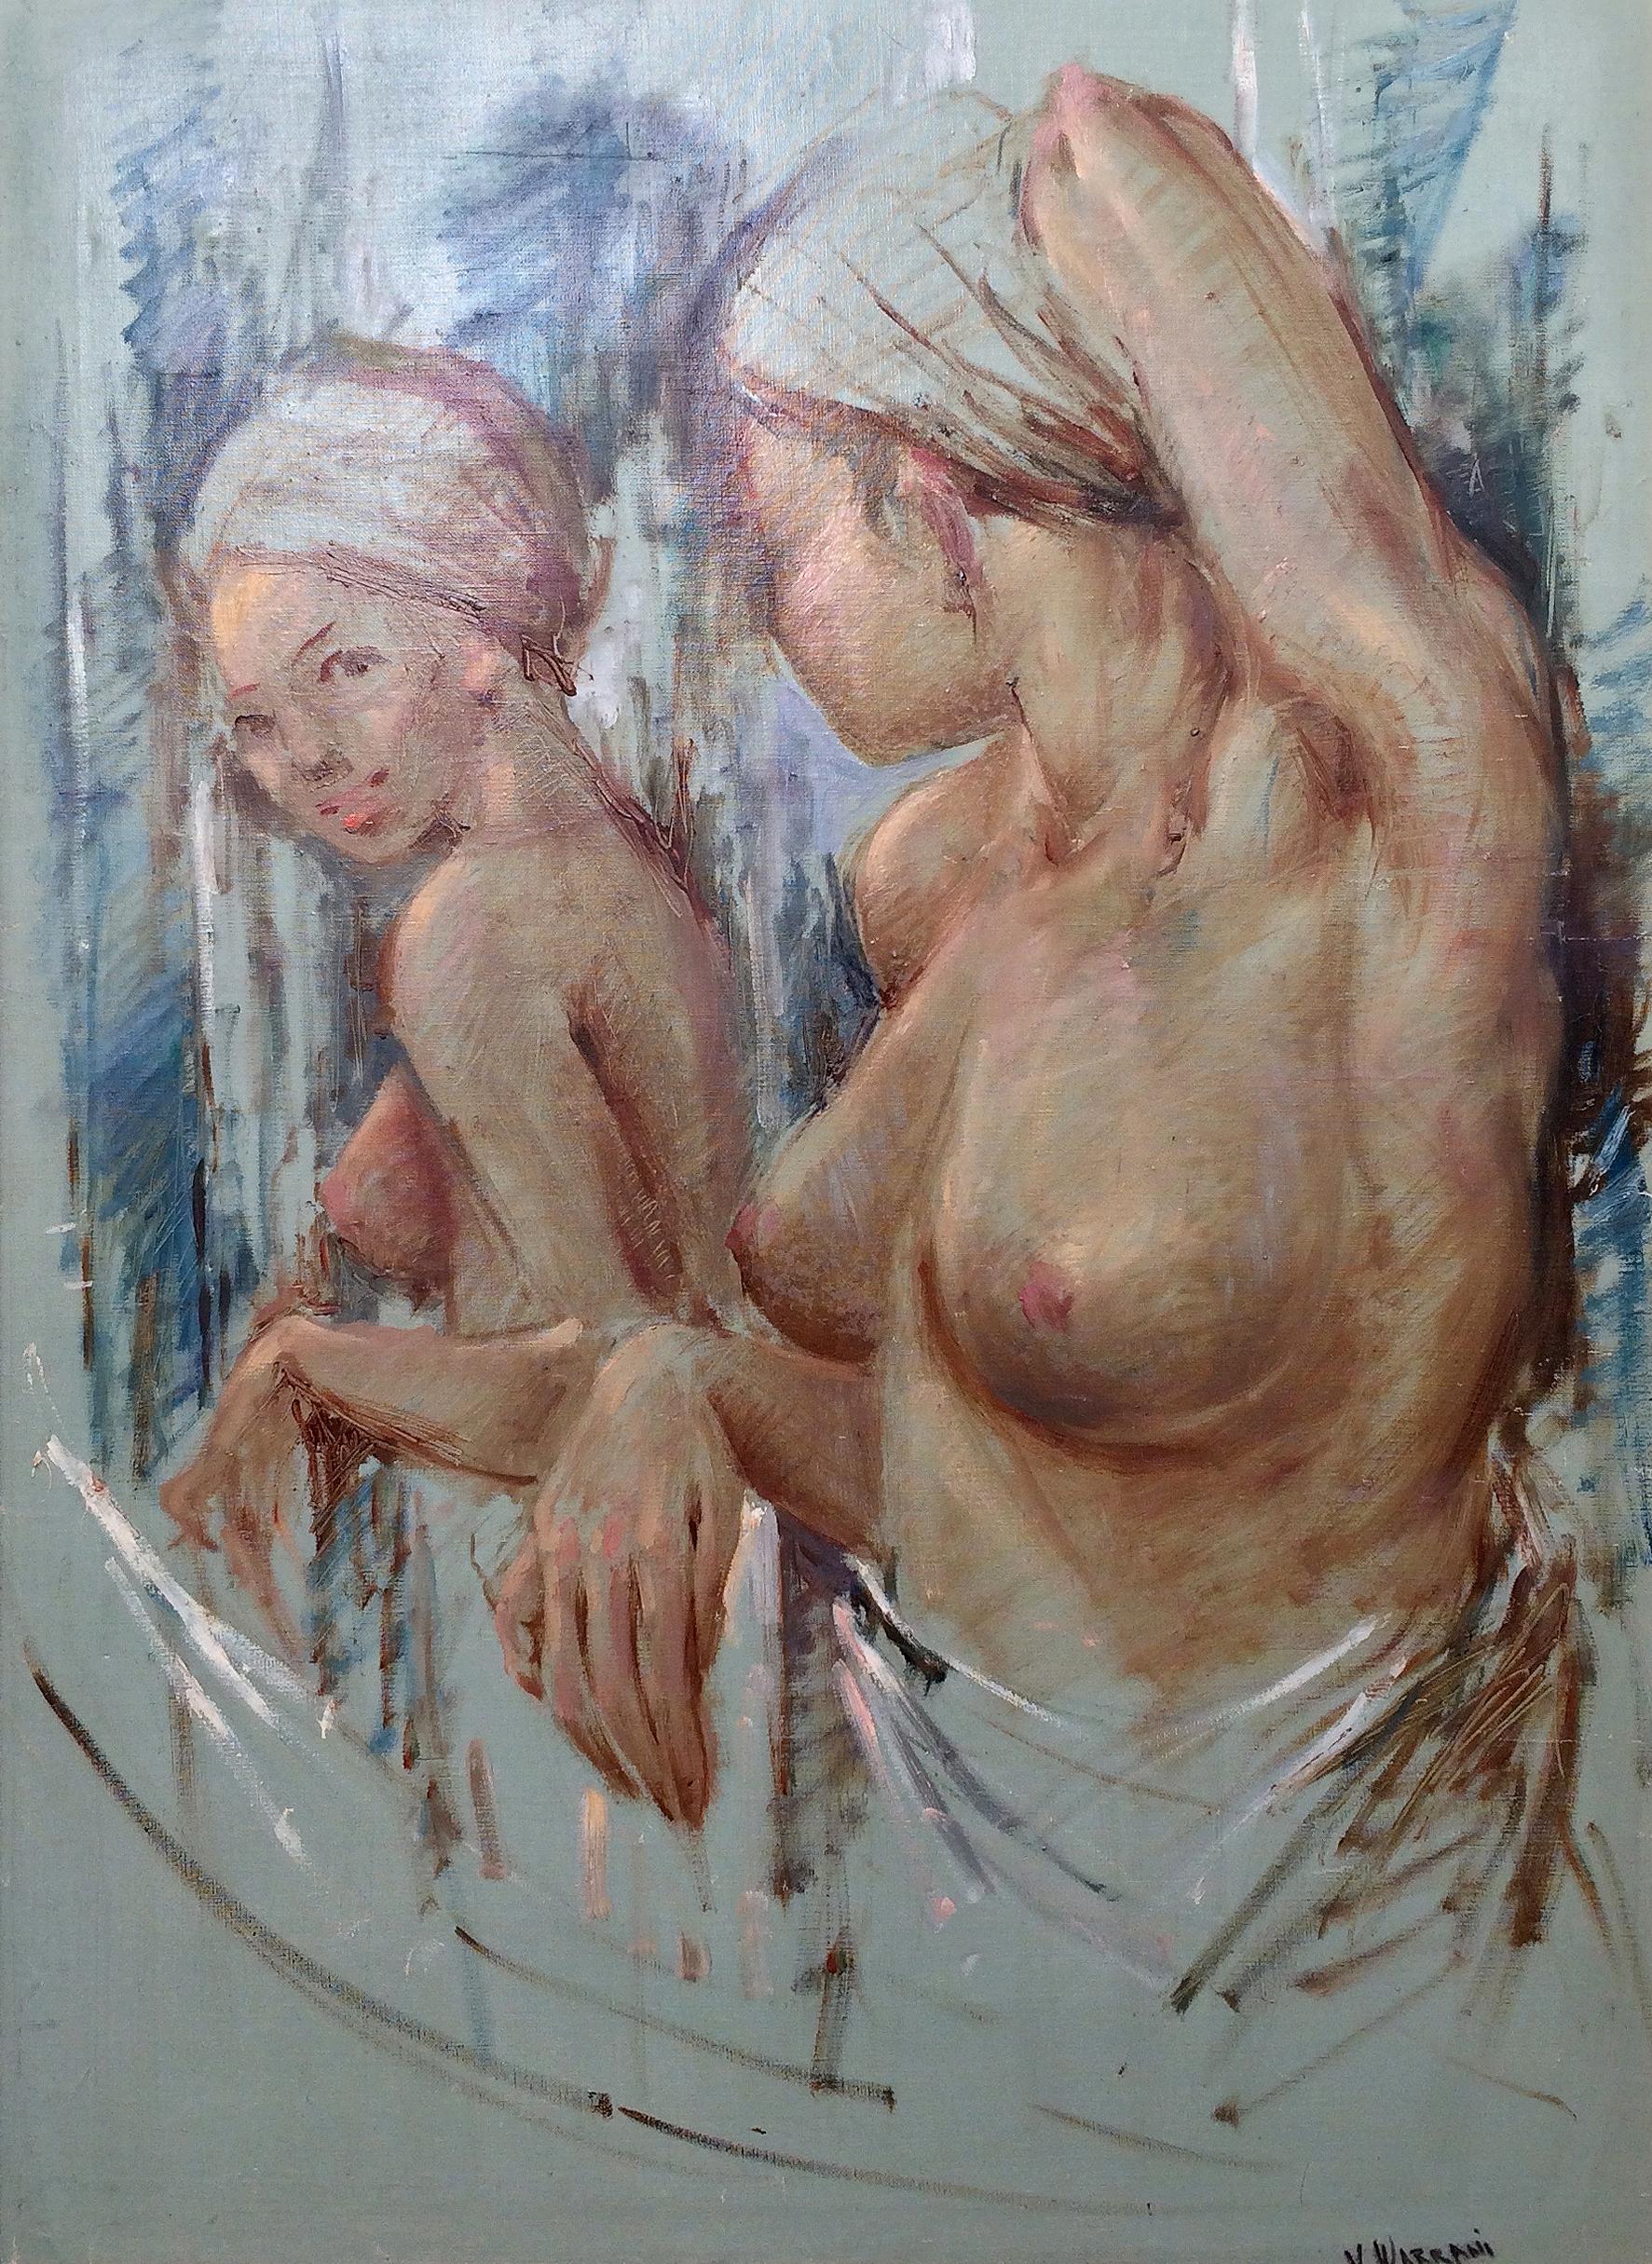 V. Warrami; 
Mirror reflection; 
oil on canvas; 
32 x 24 in; framed: 36 x 28 in;